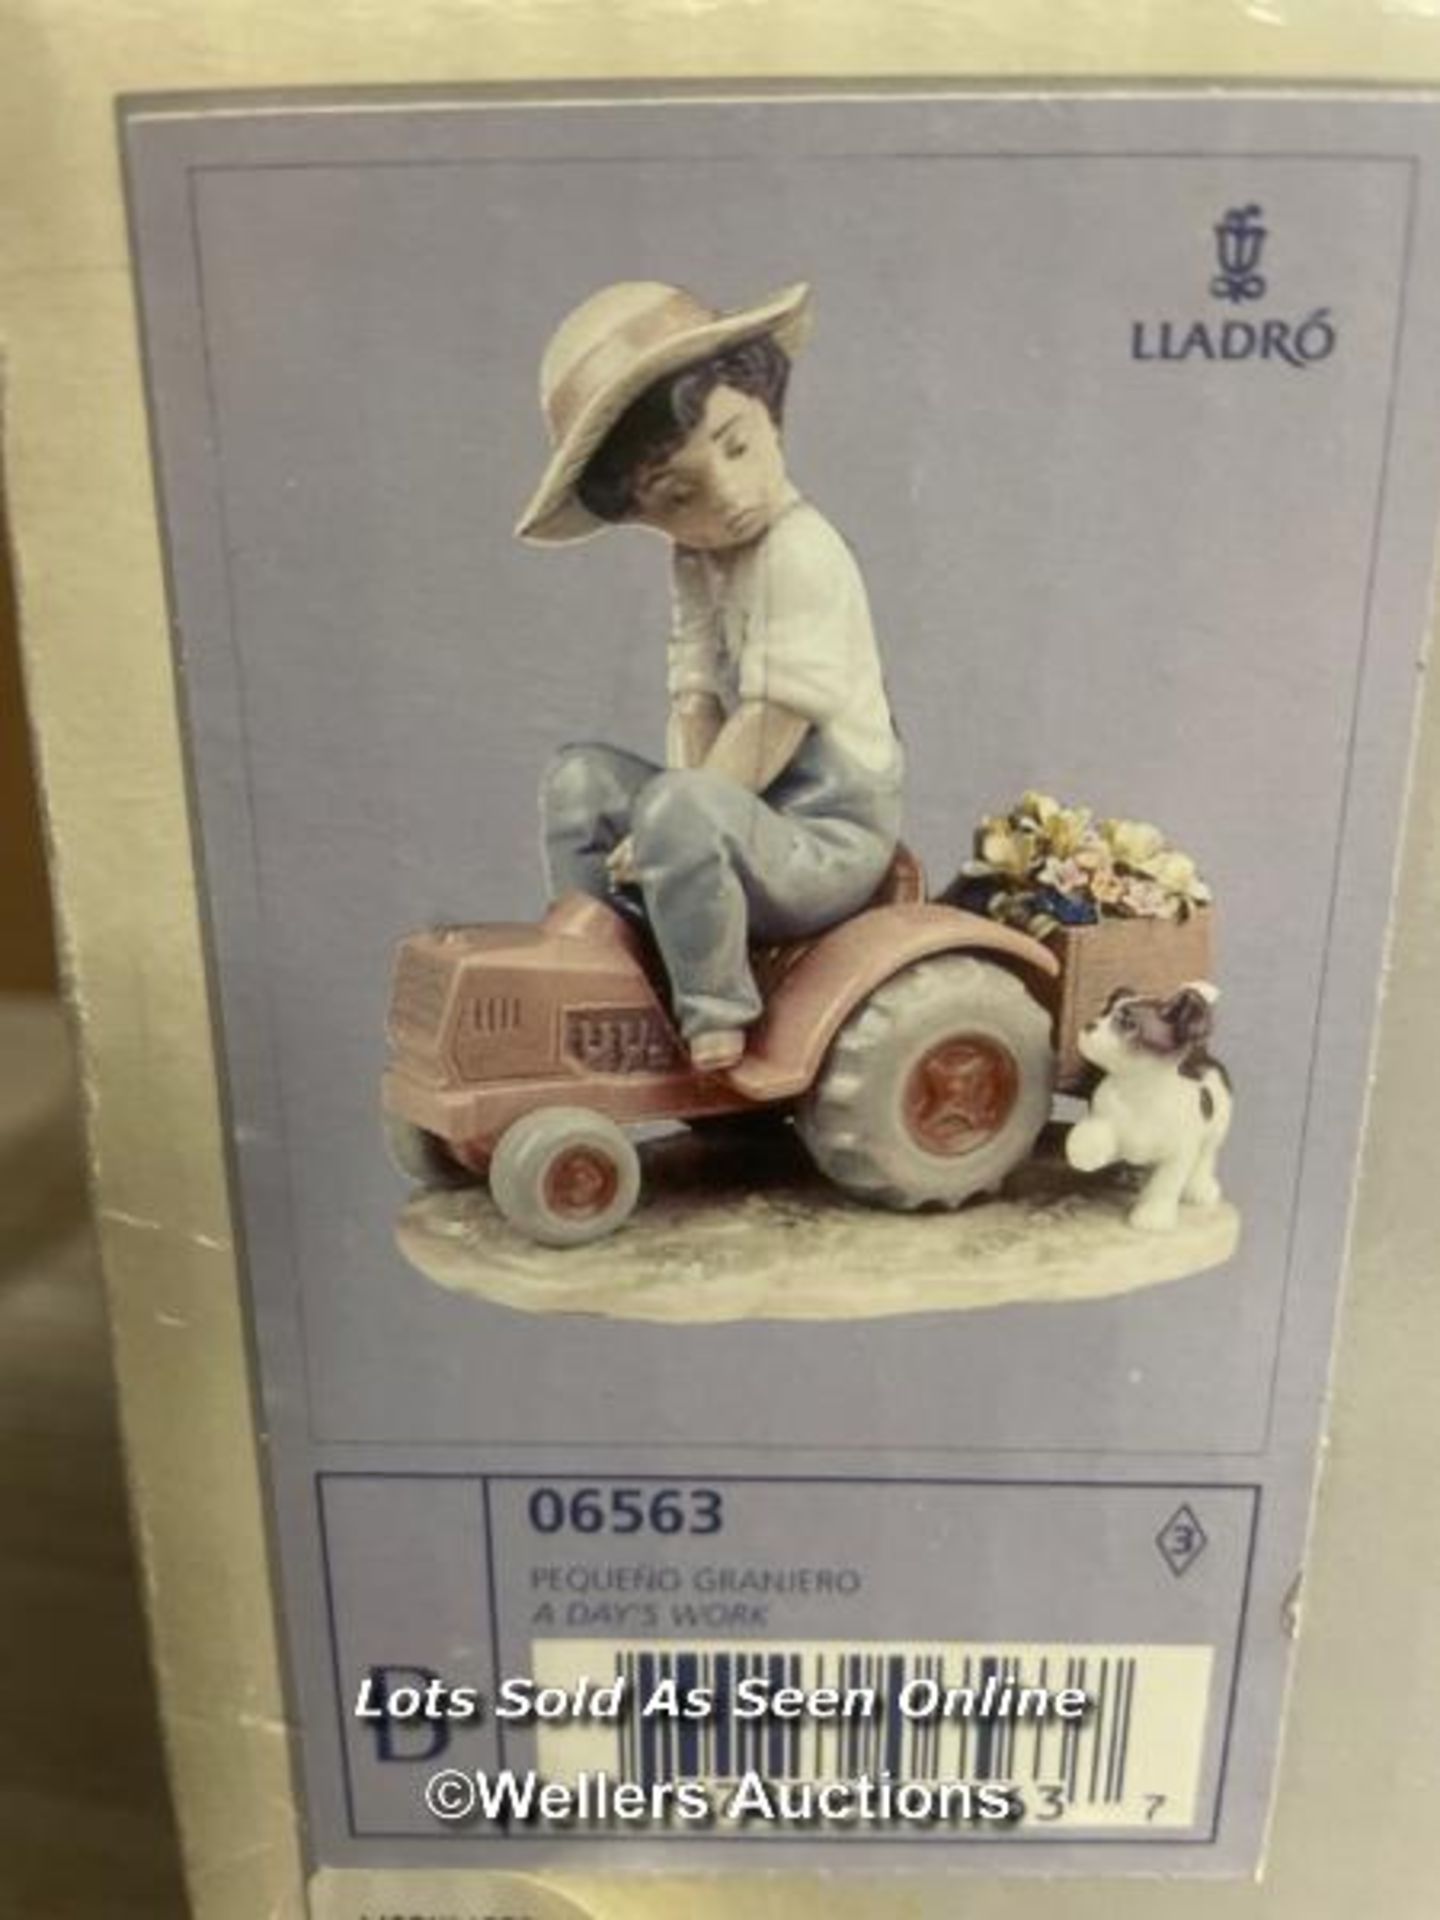 LLADRO " A DAY'S WORK" NO.06563, BOXED - Image 10 of 10